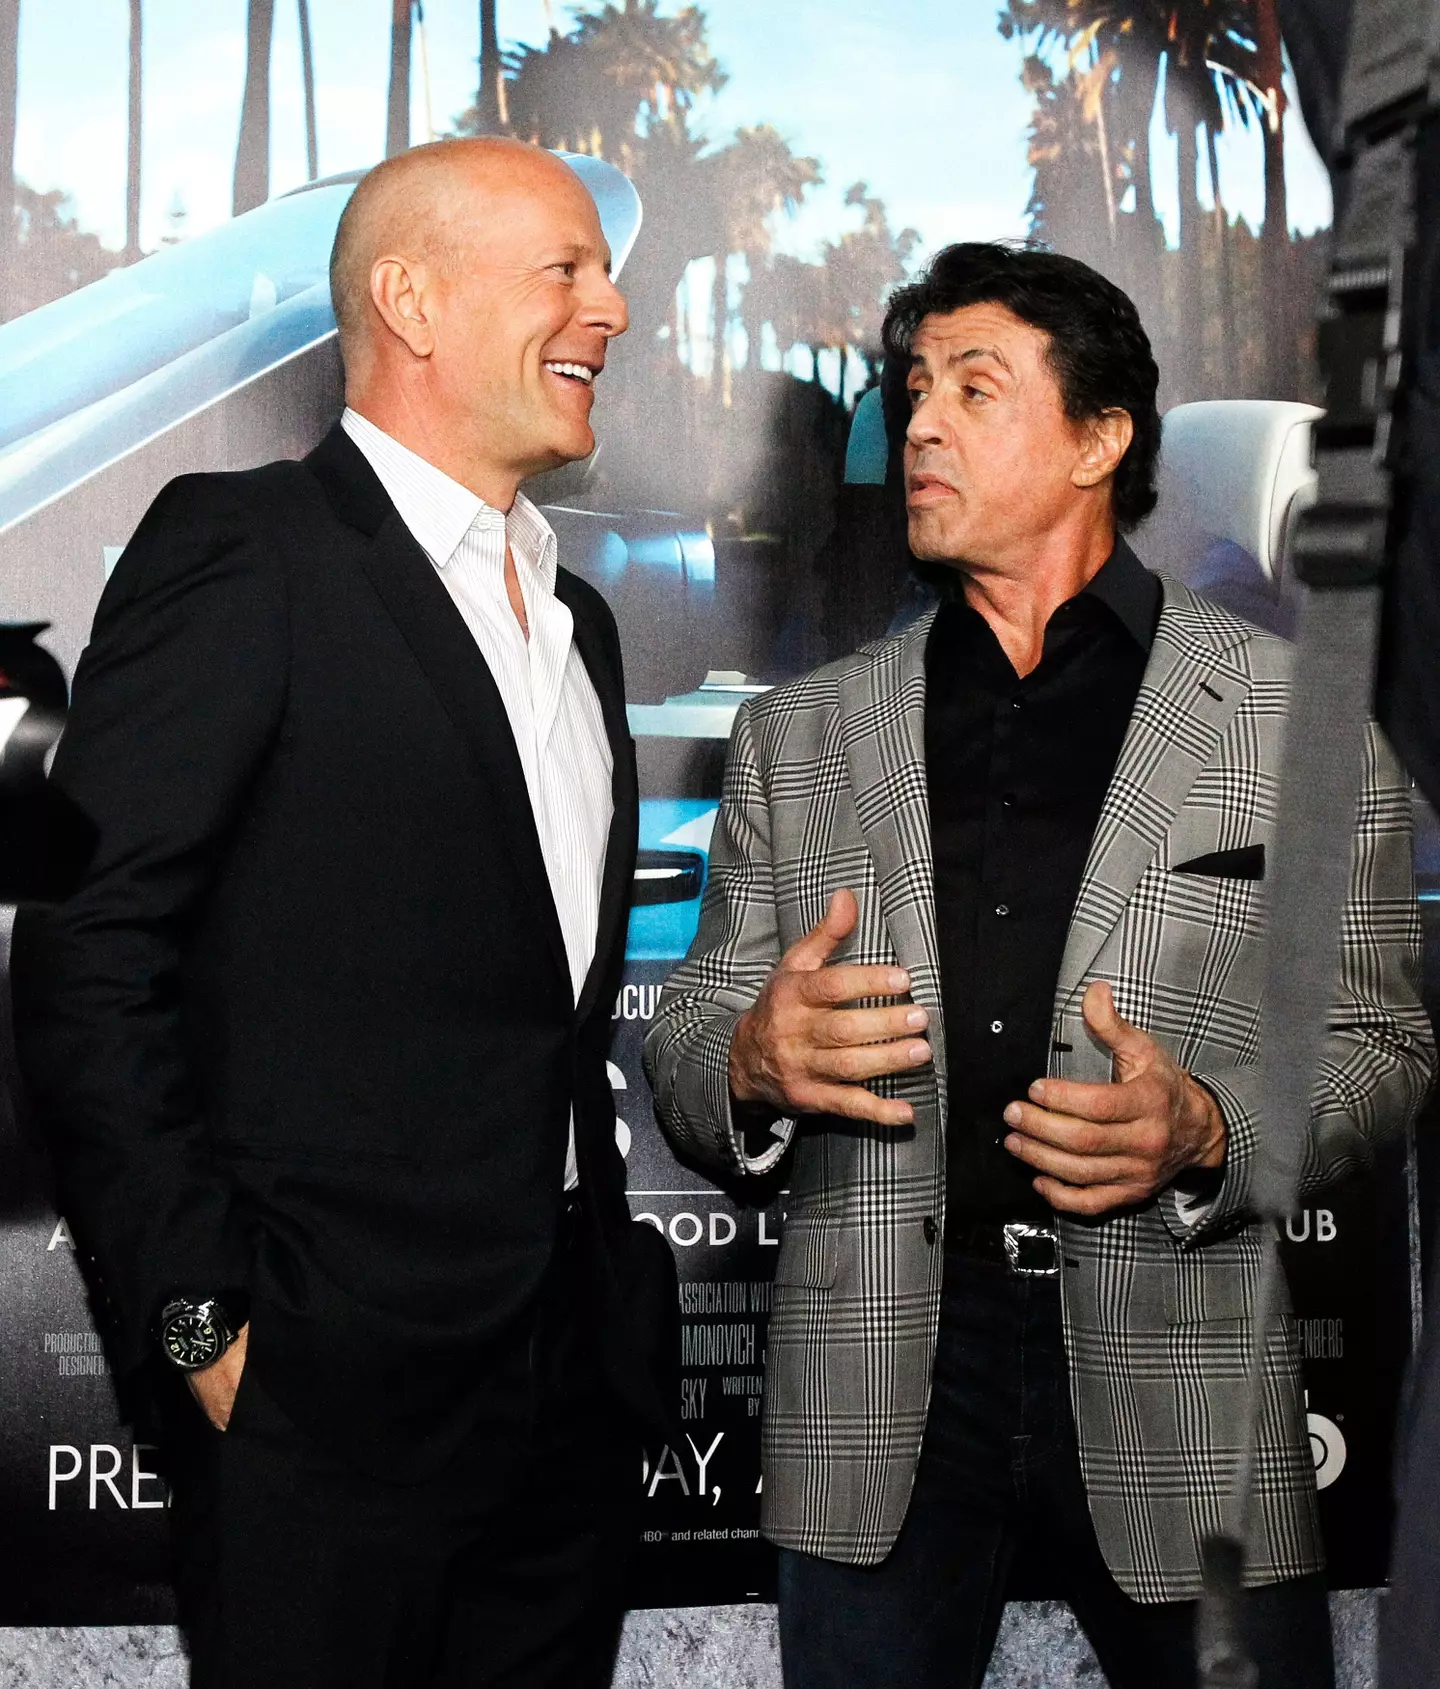 Stallone provided an update on Willis' health.